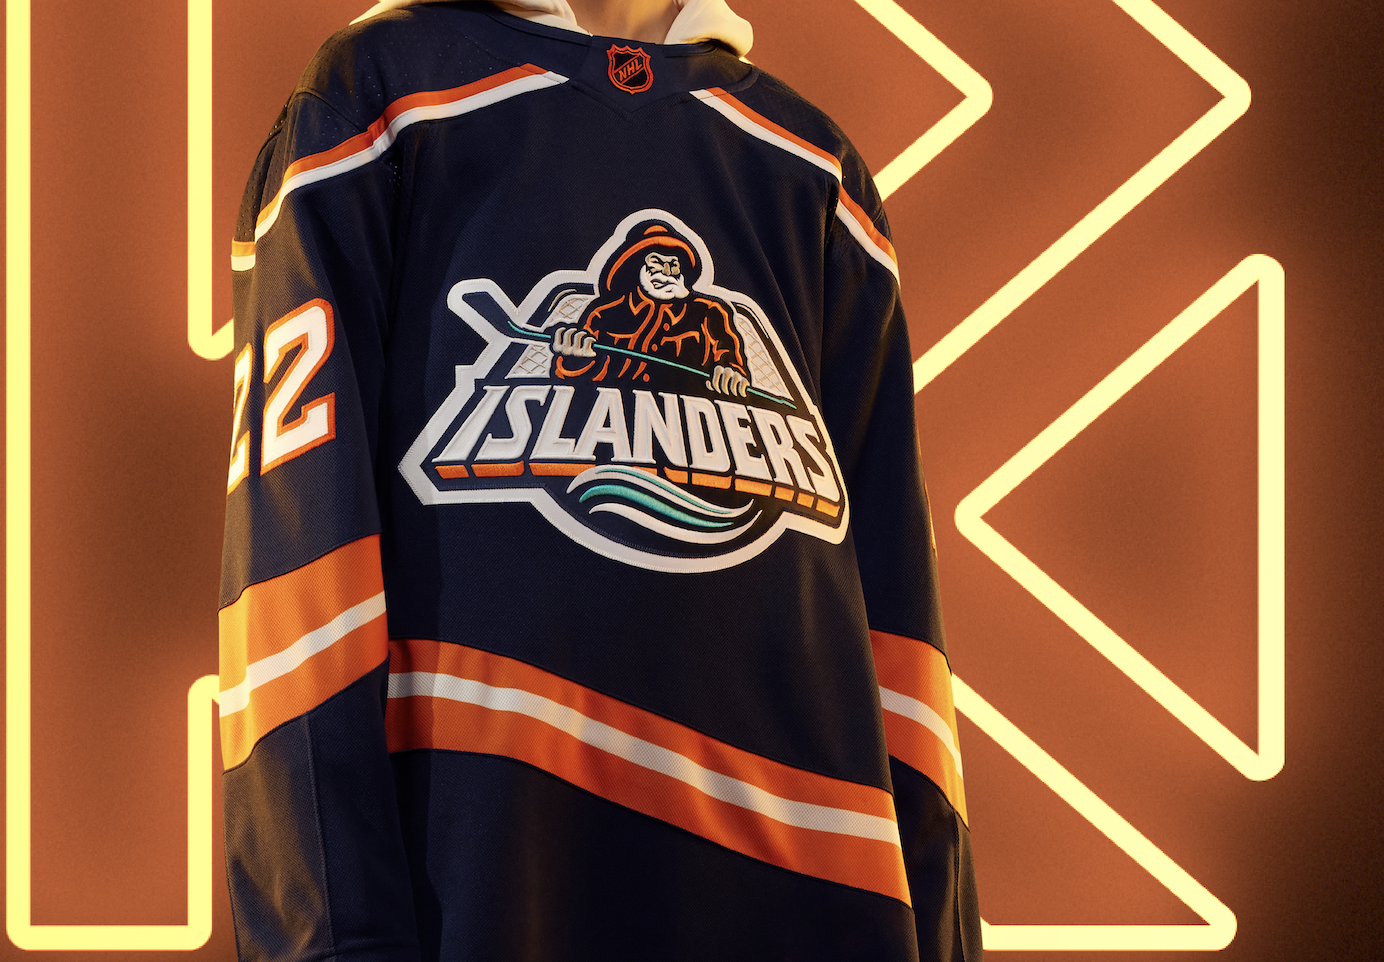 No design aspect was more requested after Reverse Retro 2020 than the Islanders’ classic “Fisherman” logo. The fans demanded it and we’re excited to deliver for the 50<sup>th</sup>anniversary of the Islanders.